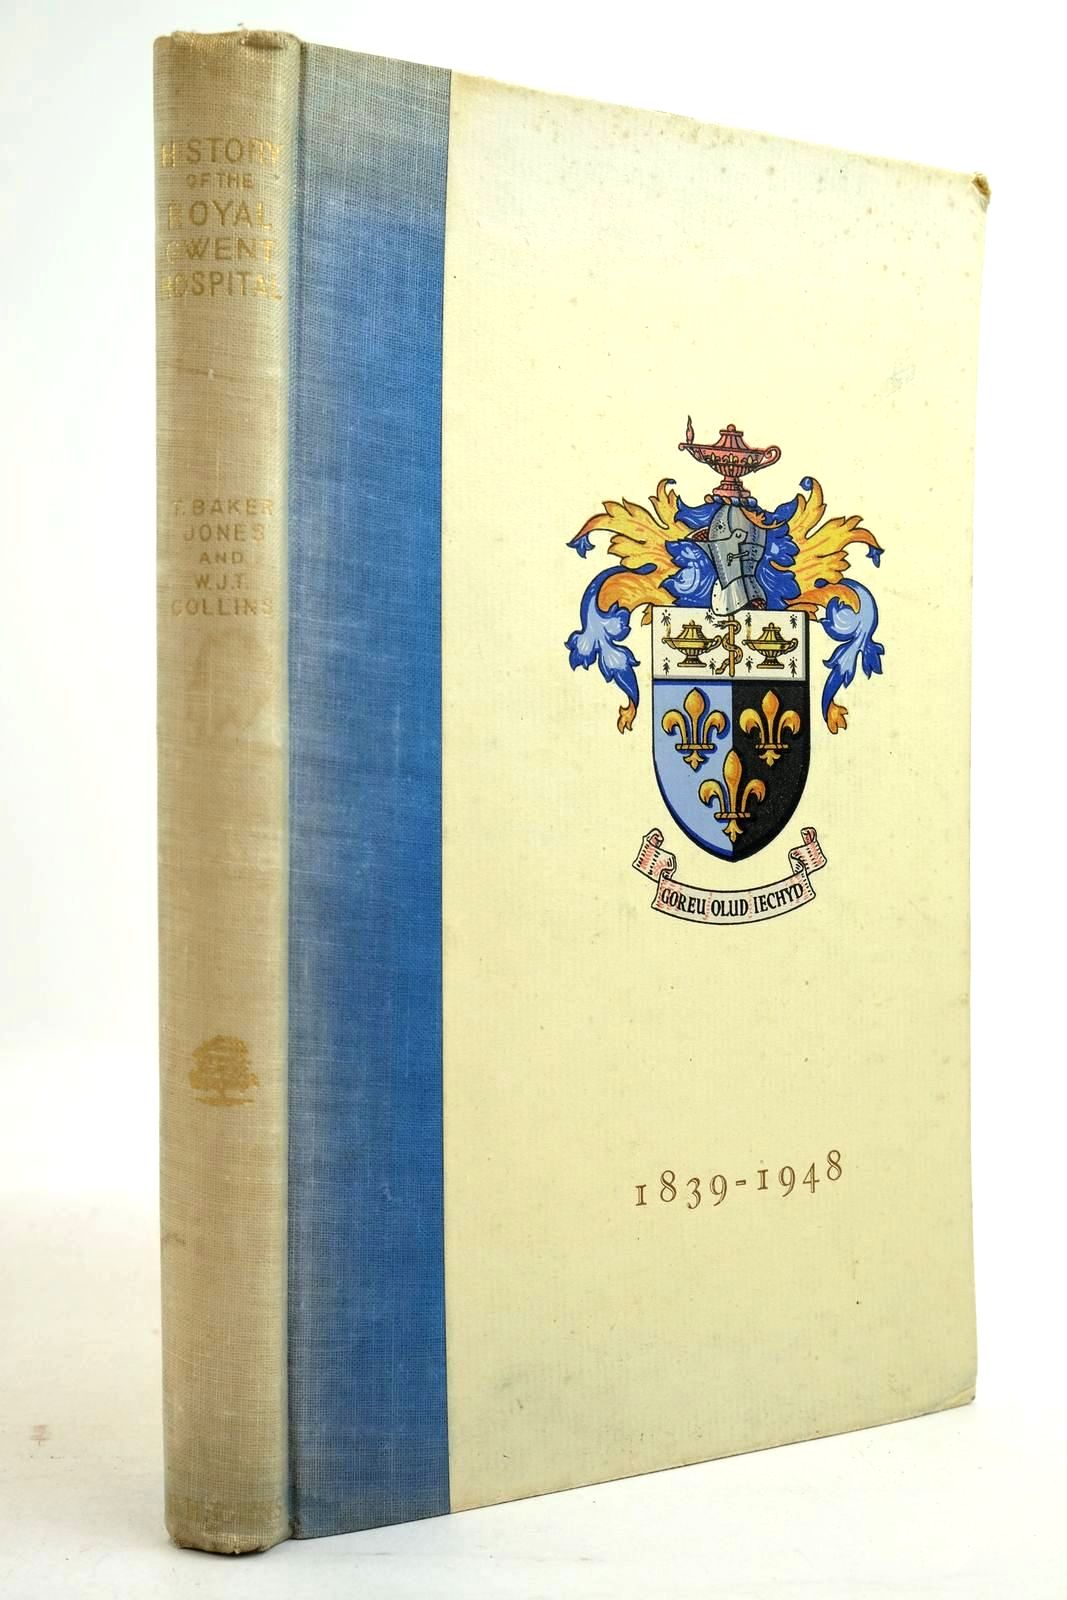 Photo of HISTORY OF THE ROYAL GWENT HOSPITAL 1839-1948 written by Jones, Thomas Baker Collins, W.J. Townsend published by R.H. Johns (STOCK CODE: 2134442)  for sale by Stella & Rose's Books